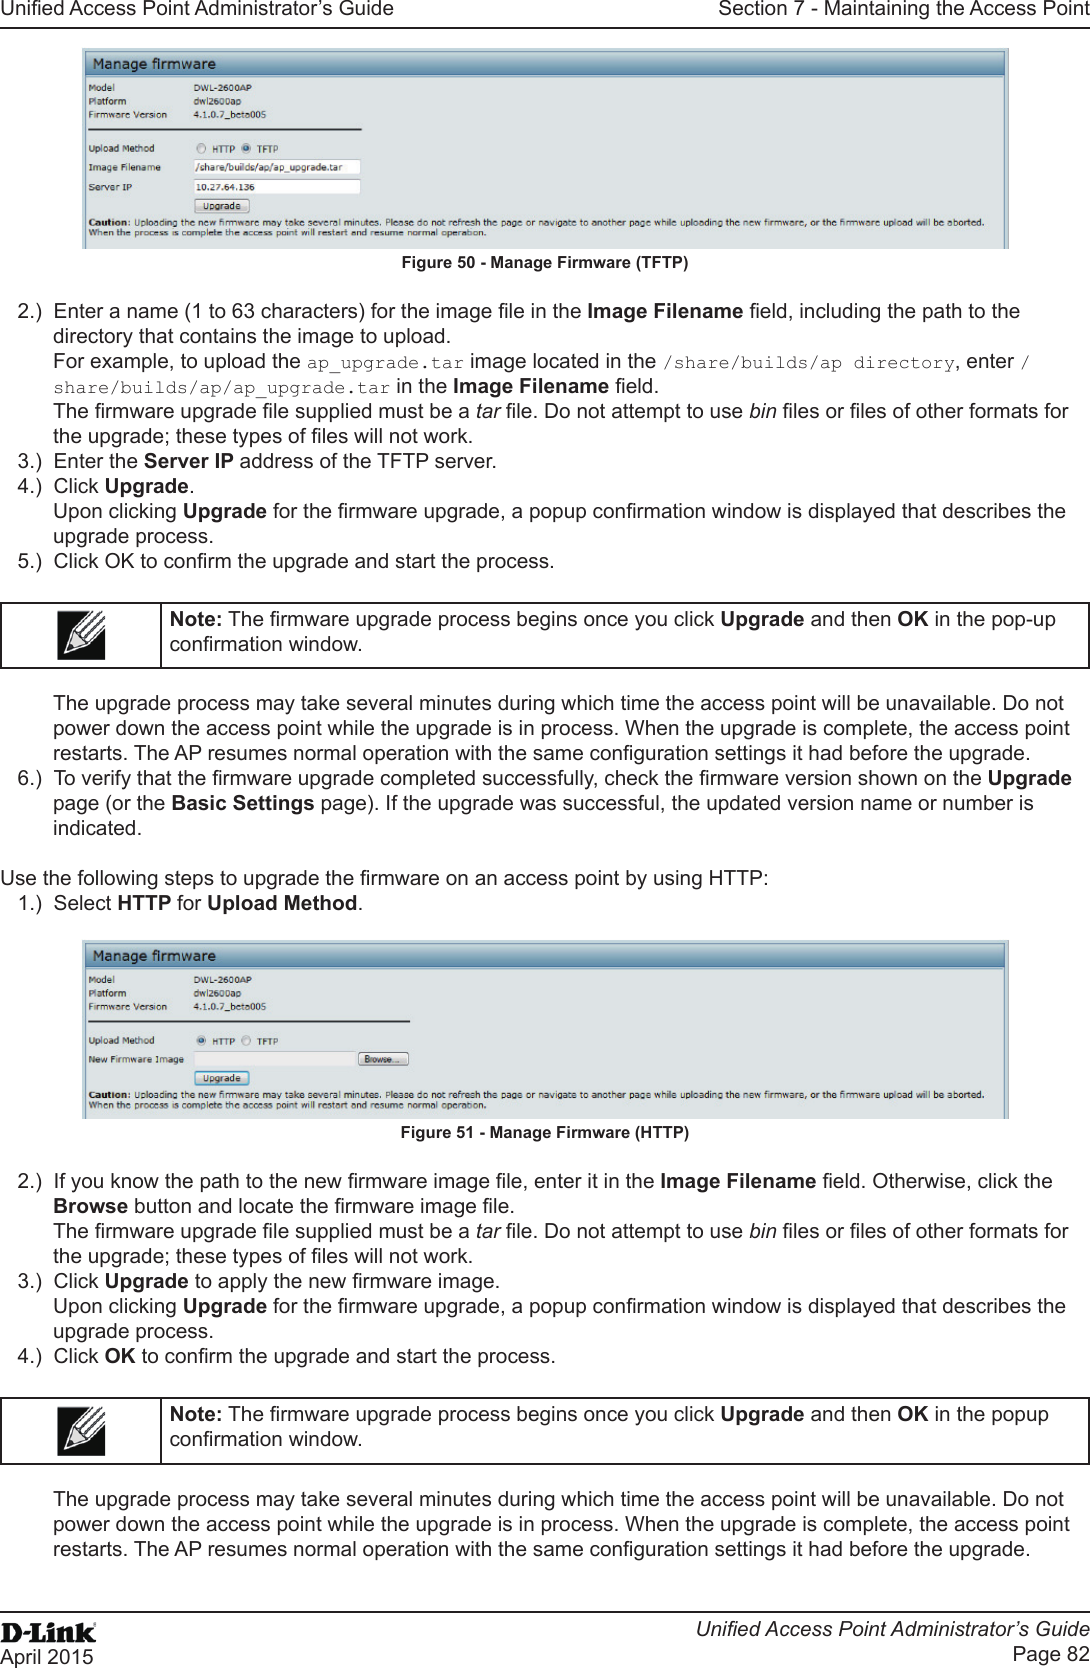 Unied Access Point Administrator’s GuideUnied Access Point Administrator’s GuidePage 82April 2015Section 7 - Maintaining the Access PointFigure 50 - Manage Firmware (TFTP)2.)  Enter a name (1 to 63 characters) for the image le in the Image Filename eld, including the path to the directory that contains the image to upload.For example, to upload the ap_upgrade.tar image located in the /share/builds/ap directory, enter /share/builds/ap/ap_upgrade.tar in the Image Filename eld.The rmware upgrade le supplied must be a tar le. Do not attempt to use bin les or les of other formats for the upgrade; these types of les will not work.3.)  Enter the Server IP address of the TFTP server. 4.)  Click Upgrade.Upon clicking Upgrade for the rmware upgrade, a popup conrmation window is displayed that describes the upgrade process.5.)  Click OK to conrm the upgrade and start the process.Note: The rmware upgrade process begins once you click Upgrade and then OK in the pop-up conrmation window.The upgrade process may take several minutes during which time the access point will be unavailable. Do not power down the access point while the upgrade is in process. When the upgrade is complete, the access point restarts. The AP resumes normal operation with the same conguration settings it had before the upgrade.6.)  To verify that the rmware upgrade completed successfully, check the rmware version shown on the Upgrade page (or the Basic Settings page). If the upgrade was successful, the updated version name or number is indicated.Use the following steps to upgrade the rmware on an access point by using HTTP:1.)  Select HTTP for Upload Method.Figure 51 - Manage Firmware (HTTP)2.)  If you know the path to the new rmware image le, enter it in the Image Filename eld. Otherwise, click the Browse button and locate the rmware image le.The rmware upgrade le supplied must be a tar le. Do not attempt to use bin les or les of other formats for the upgrade; these types of les will not work.3.)  Click Upgrade to apply the new rmware image.Upon clicking Upgrade for the rmware upgrade, a popup conrmation window is displayed that describes the upgrade process.4.)  Click OK to conrm the upgrade and start the process.Note: The rmware upgrade process begins once you click Upgrade and then OK in the popup conrmation window.The upgrade process may take several minutes during which time the access point will be unavailable. Do not power down the access point while the upgrade is in process. When the upgrade is complete, the access point restarts. The AP resumes normal operation with the same conguration settings it had before the upgrade.